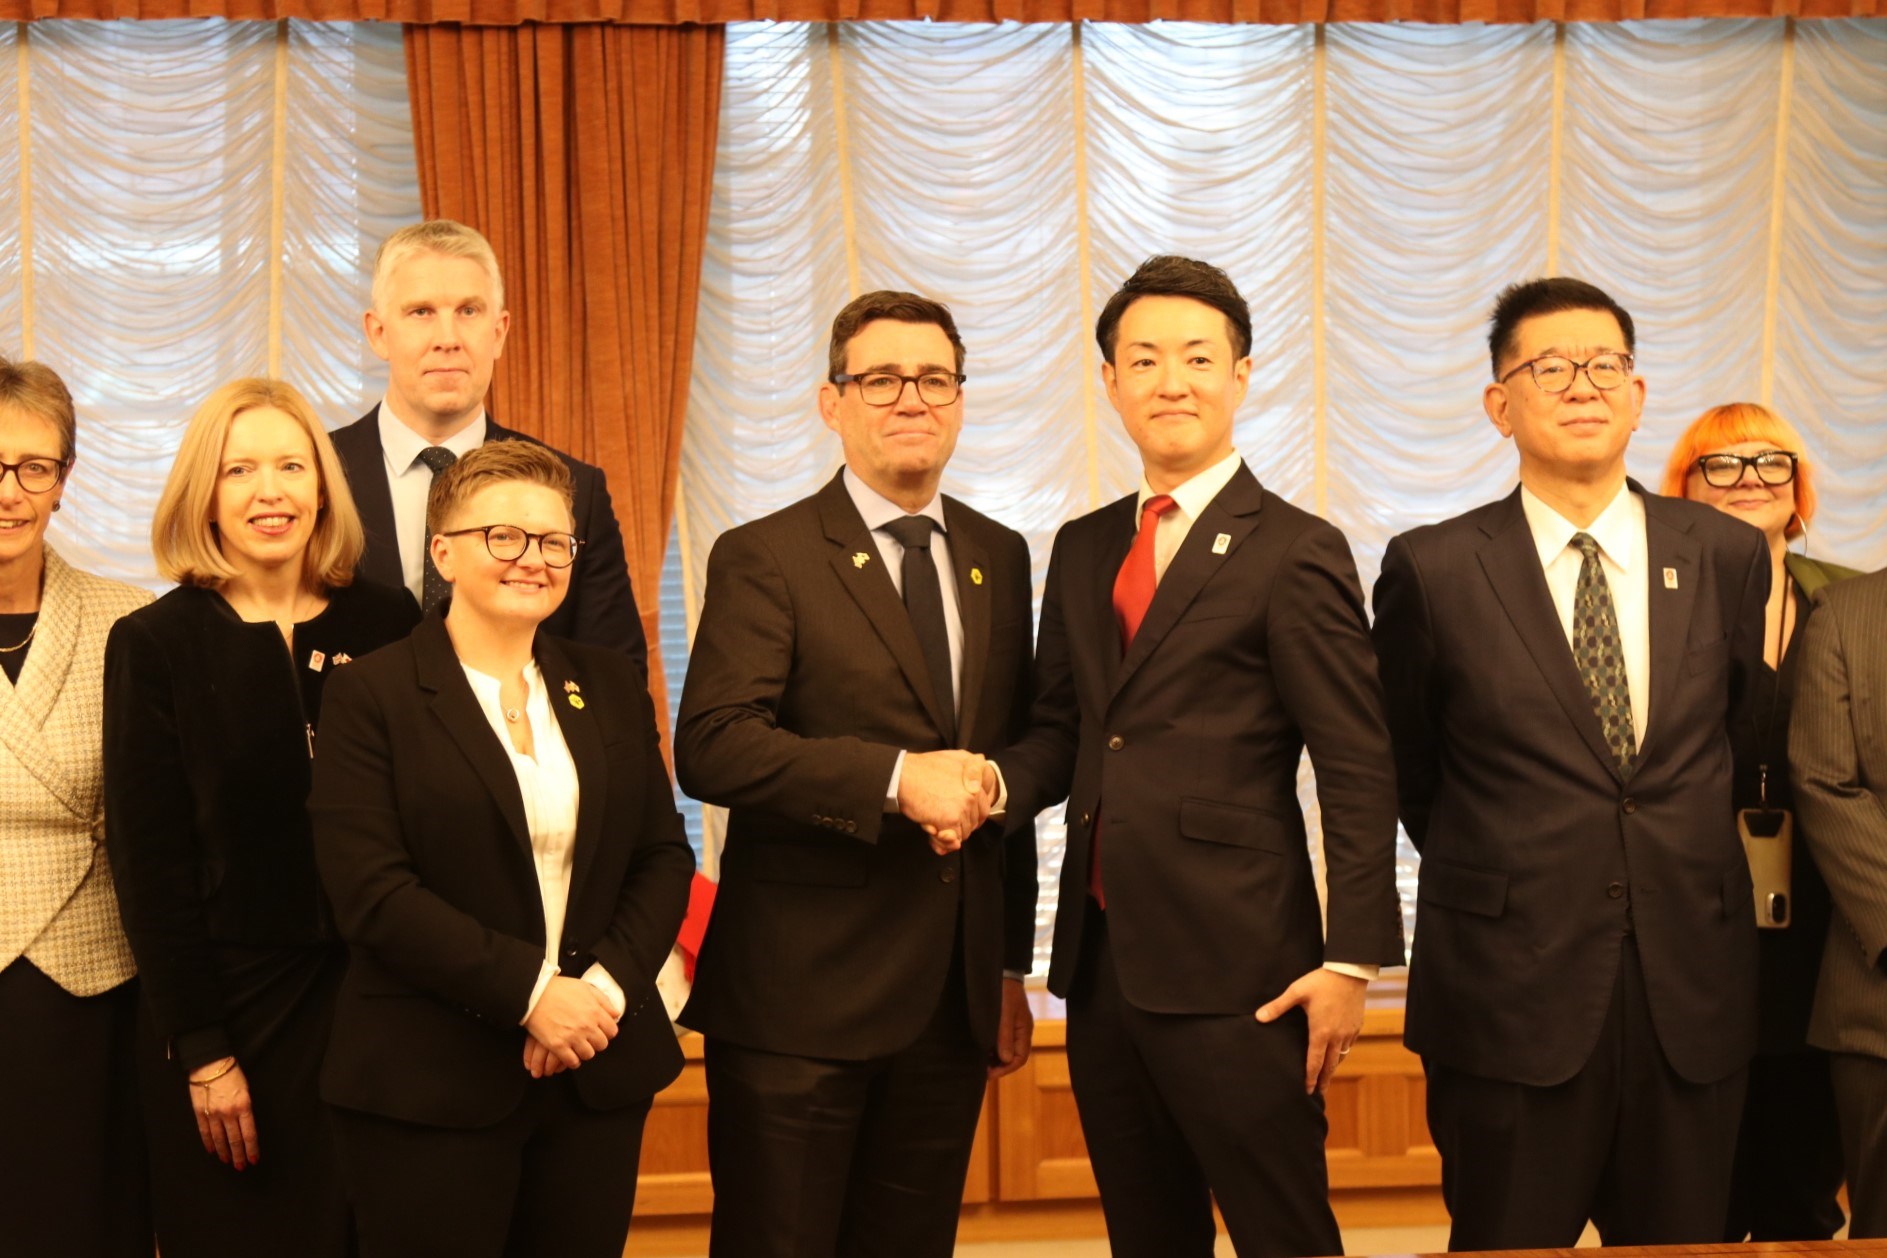 Andy Burnham and Mayor Hideyuki Yokoyama stand side-by-side, shaking hands, flanked by other members of the Greater Manchester delegation